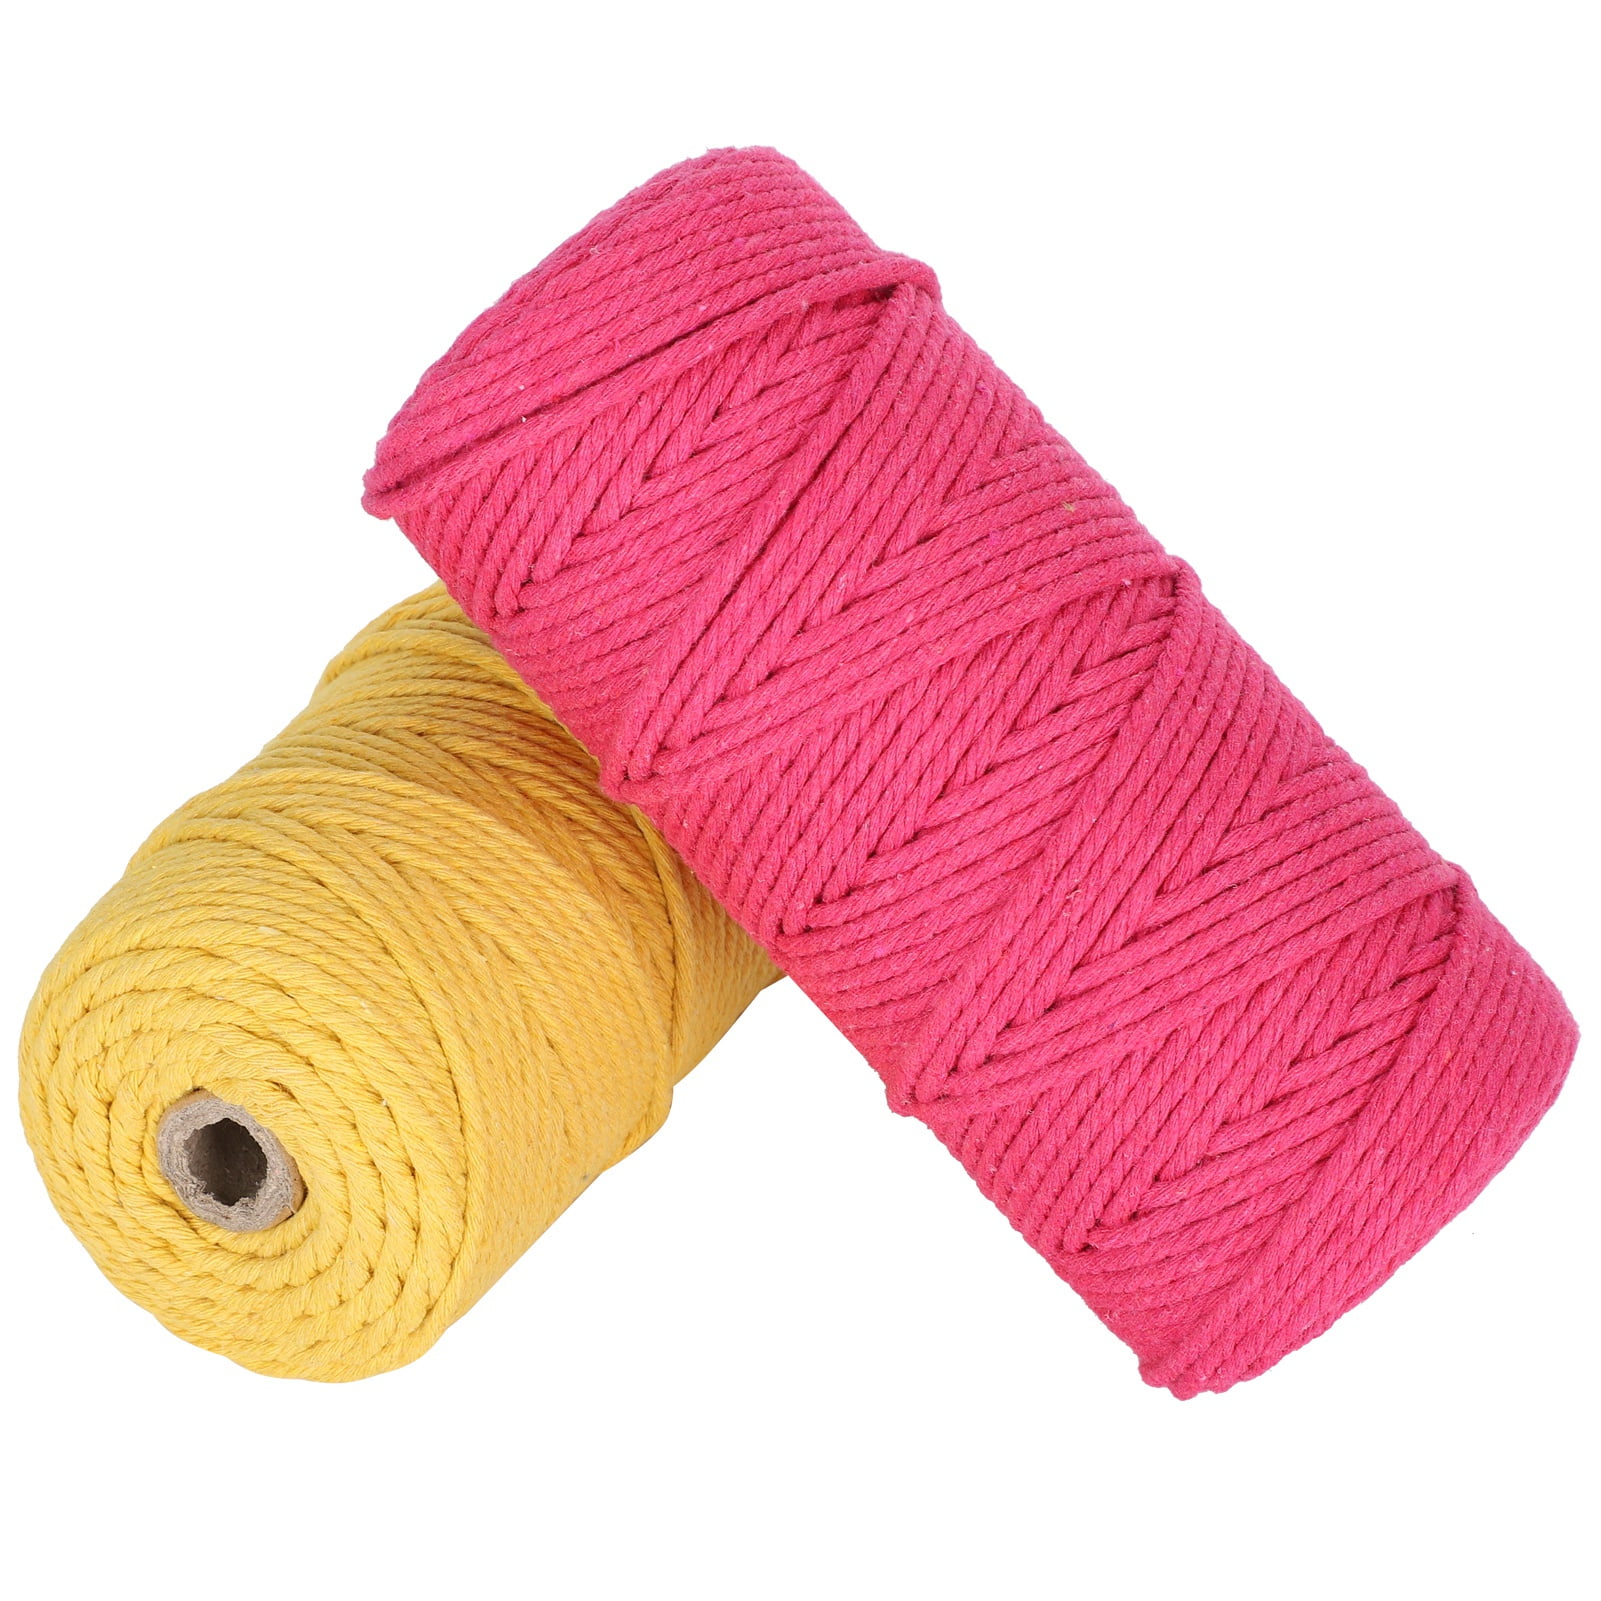 Noarlalf Knitting Needles 100m Cotton Crafts Rope Long/100Yard Cord String Macrame Home Textiles Knitting Machines, Women's, Size: One size, Pink